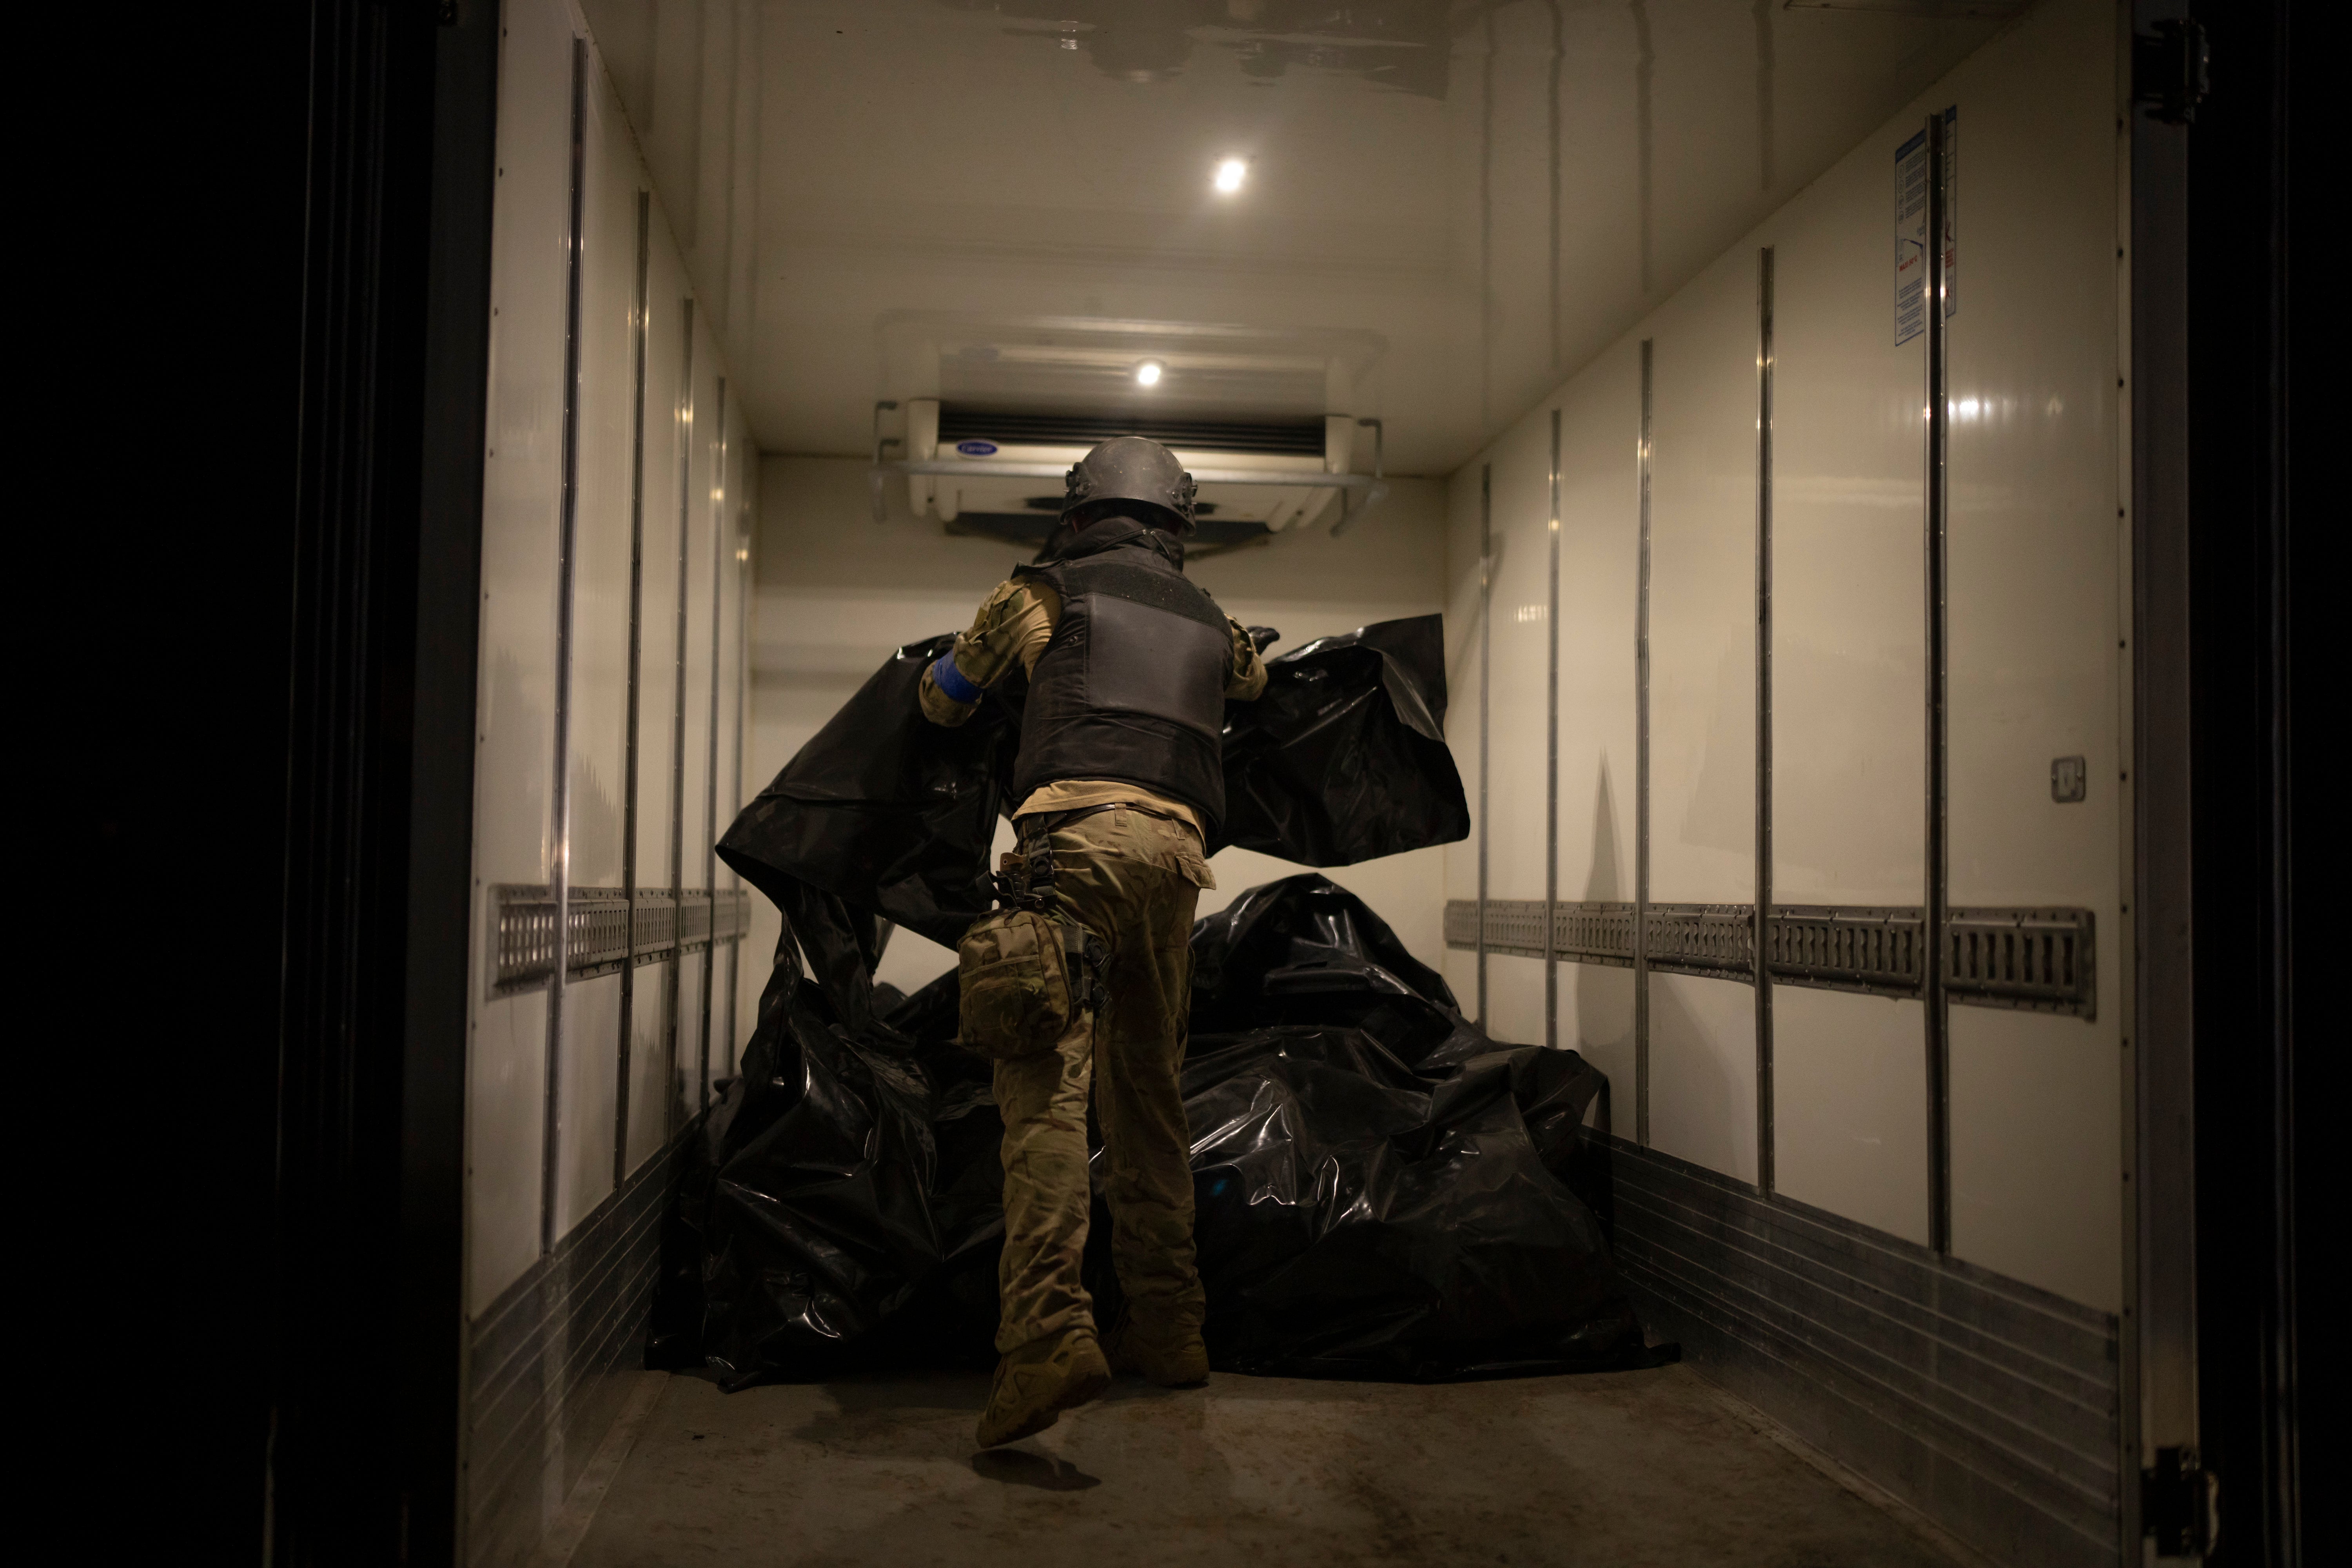 A member of Oleksii Yukov’s body collector team piles the bodies of deceased Russians in a refrigerated truck